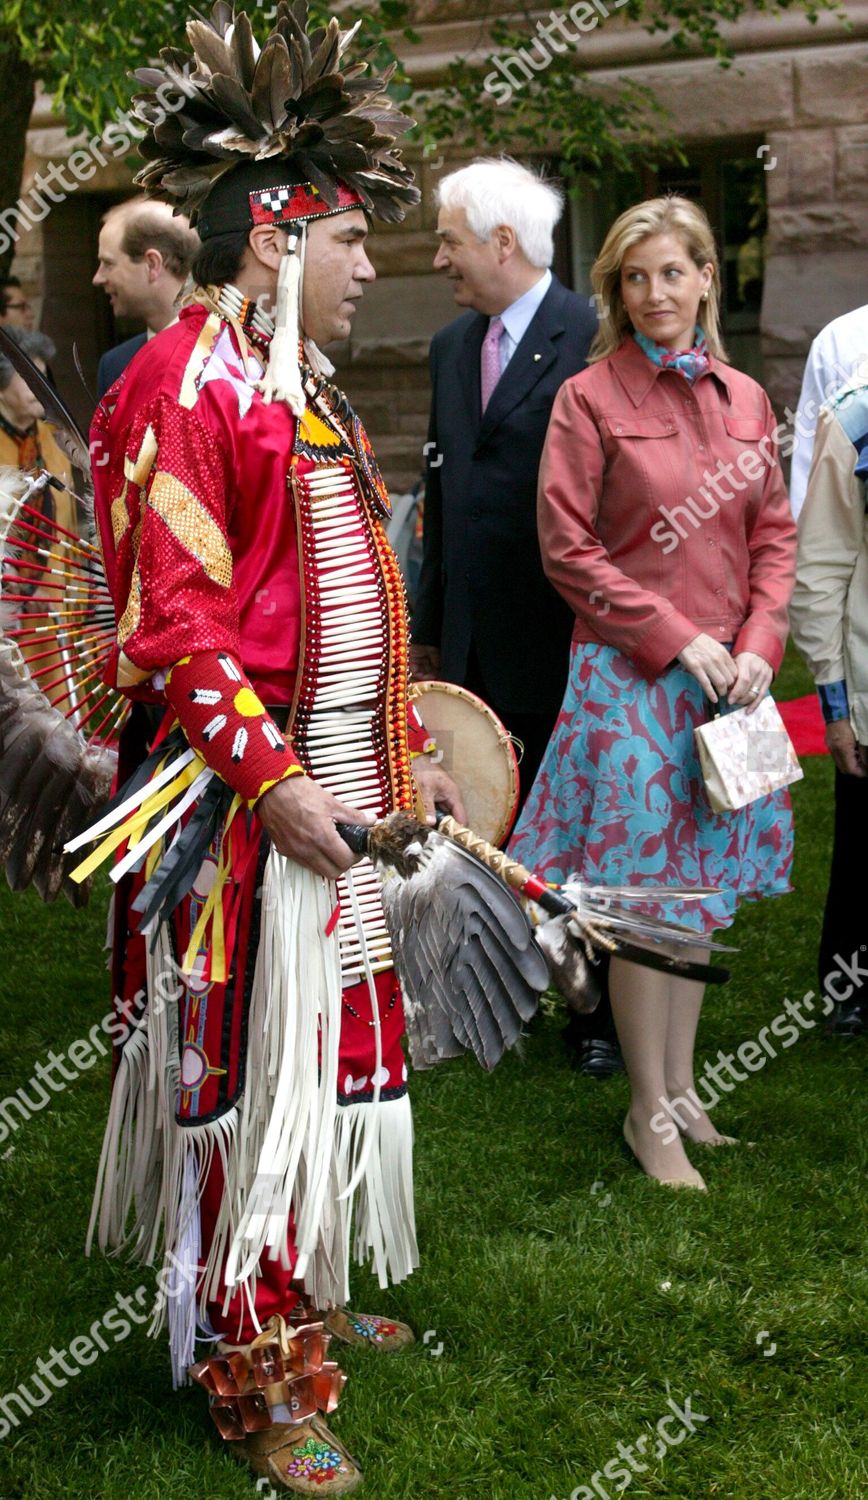 prince-edward-and-sophie-countess-of-wessex-visiting-toronto-canada-shutterstock-editorial-525415b.jpg